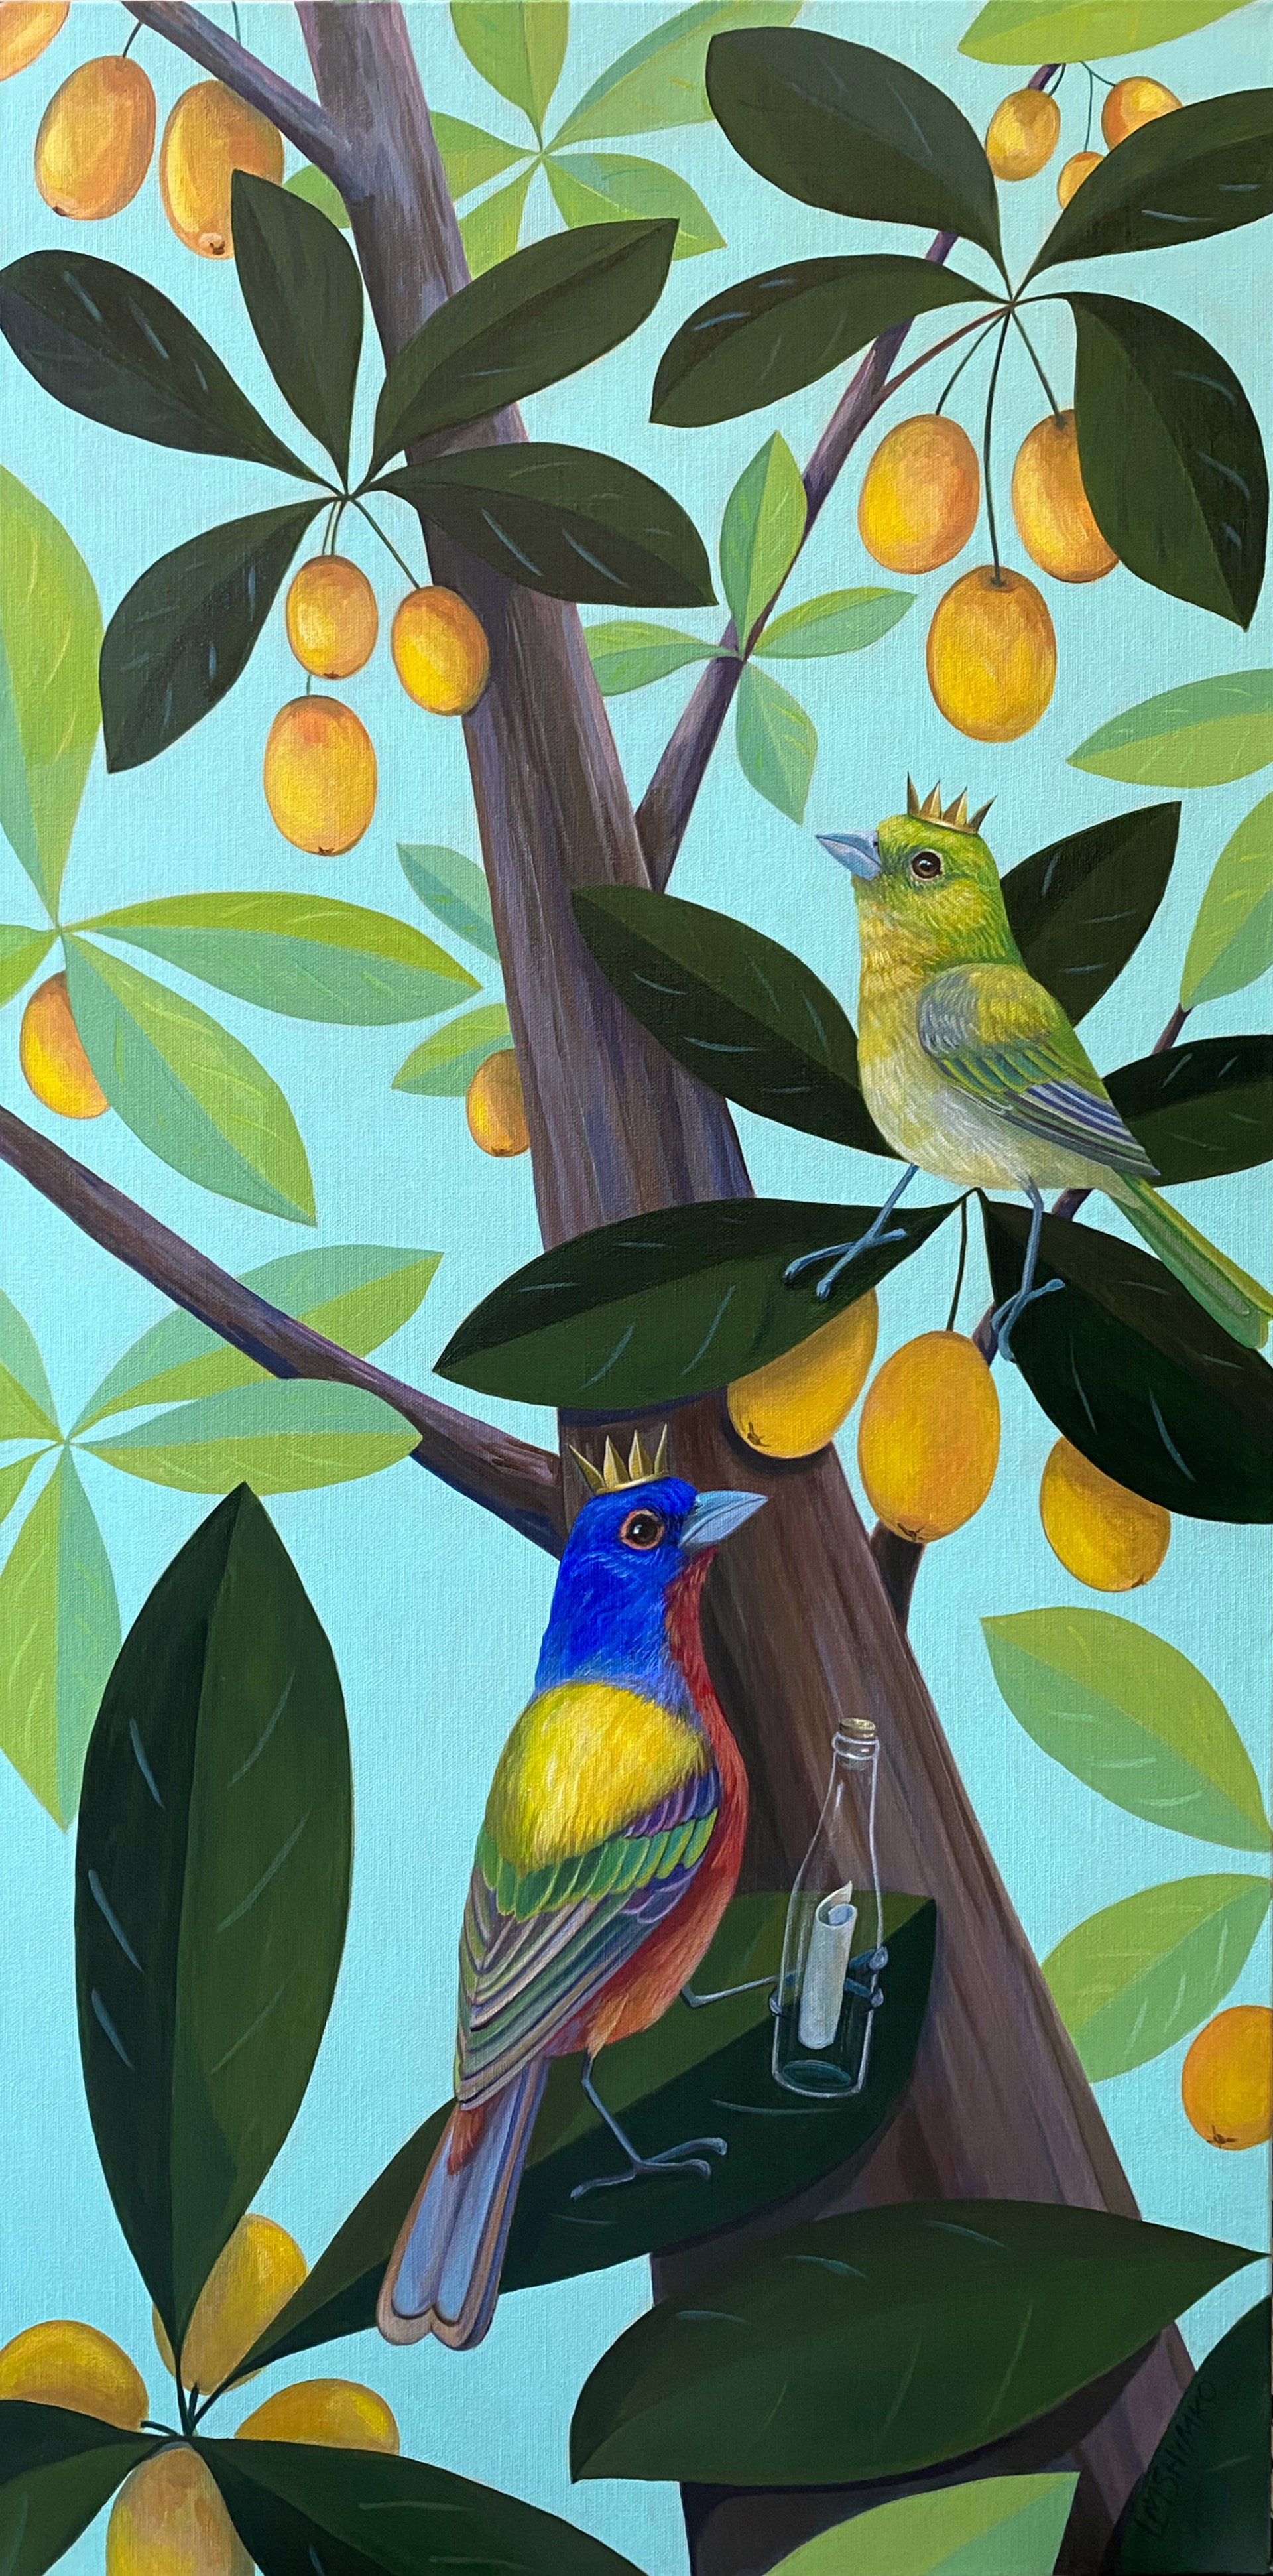 Painted Bunting Message by Lisa Shimko